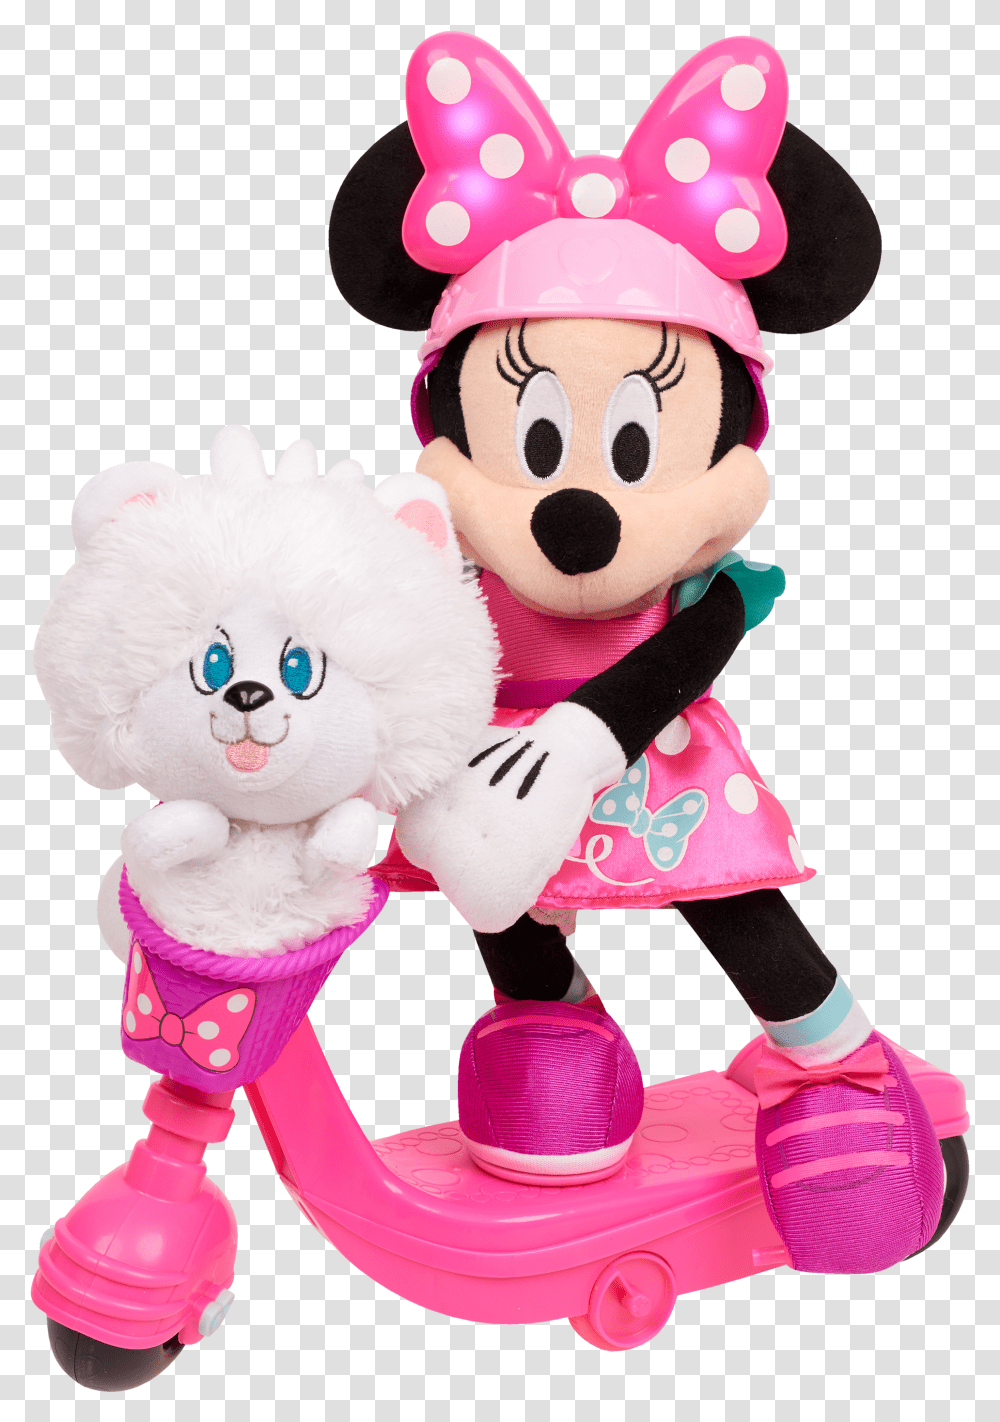 Minnie Mouse On A Scooter Transparent Png